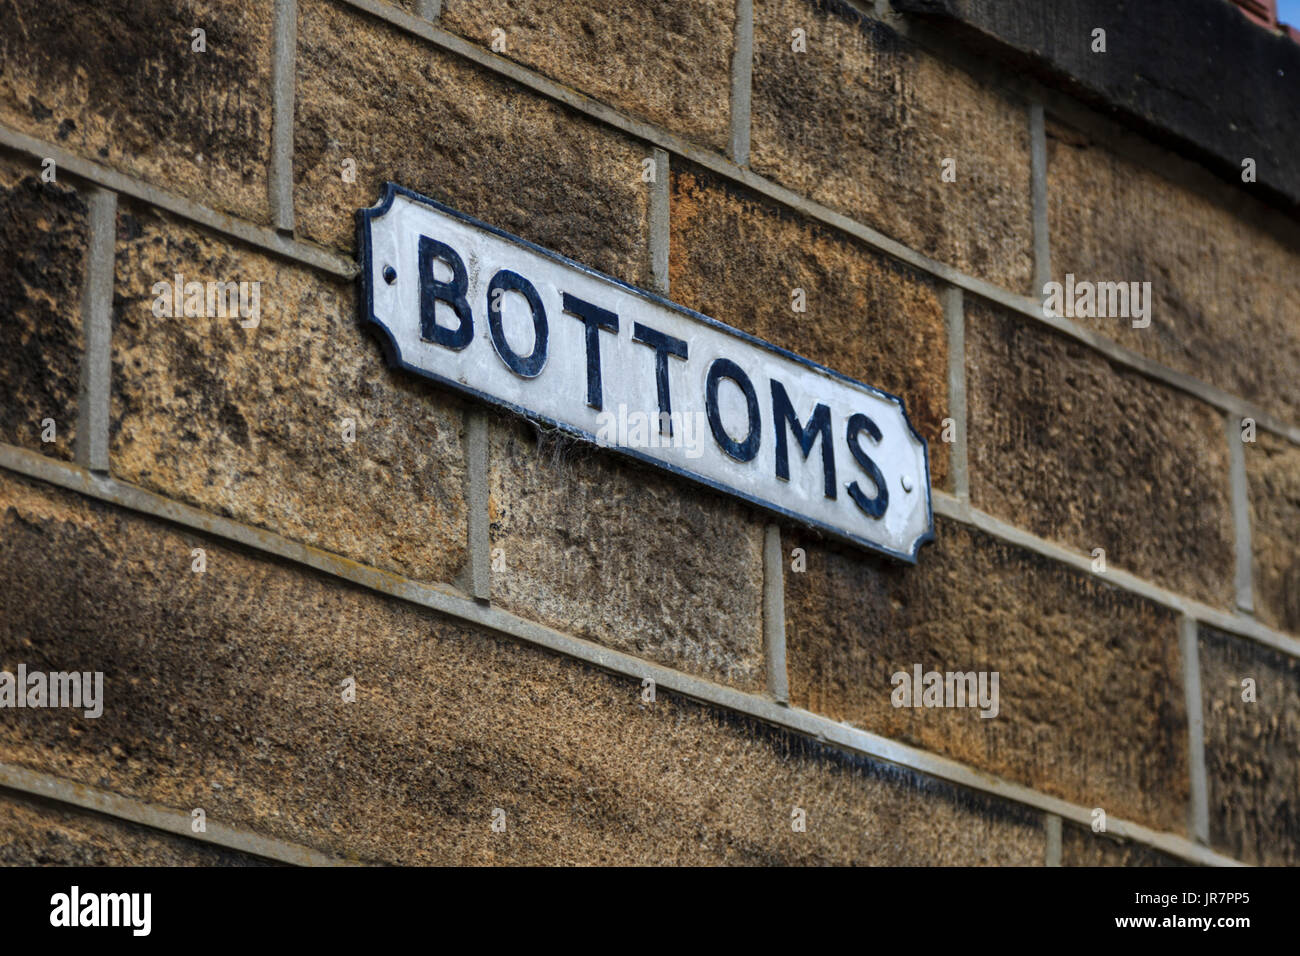 Bottoms, a terrace of houses in Cragg Vale, Calderdale, West Yorkshire, UK Stock Photo